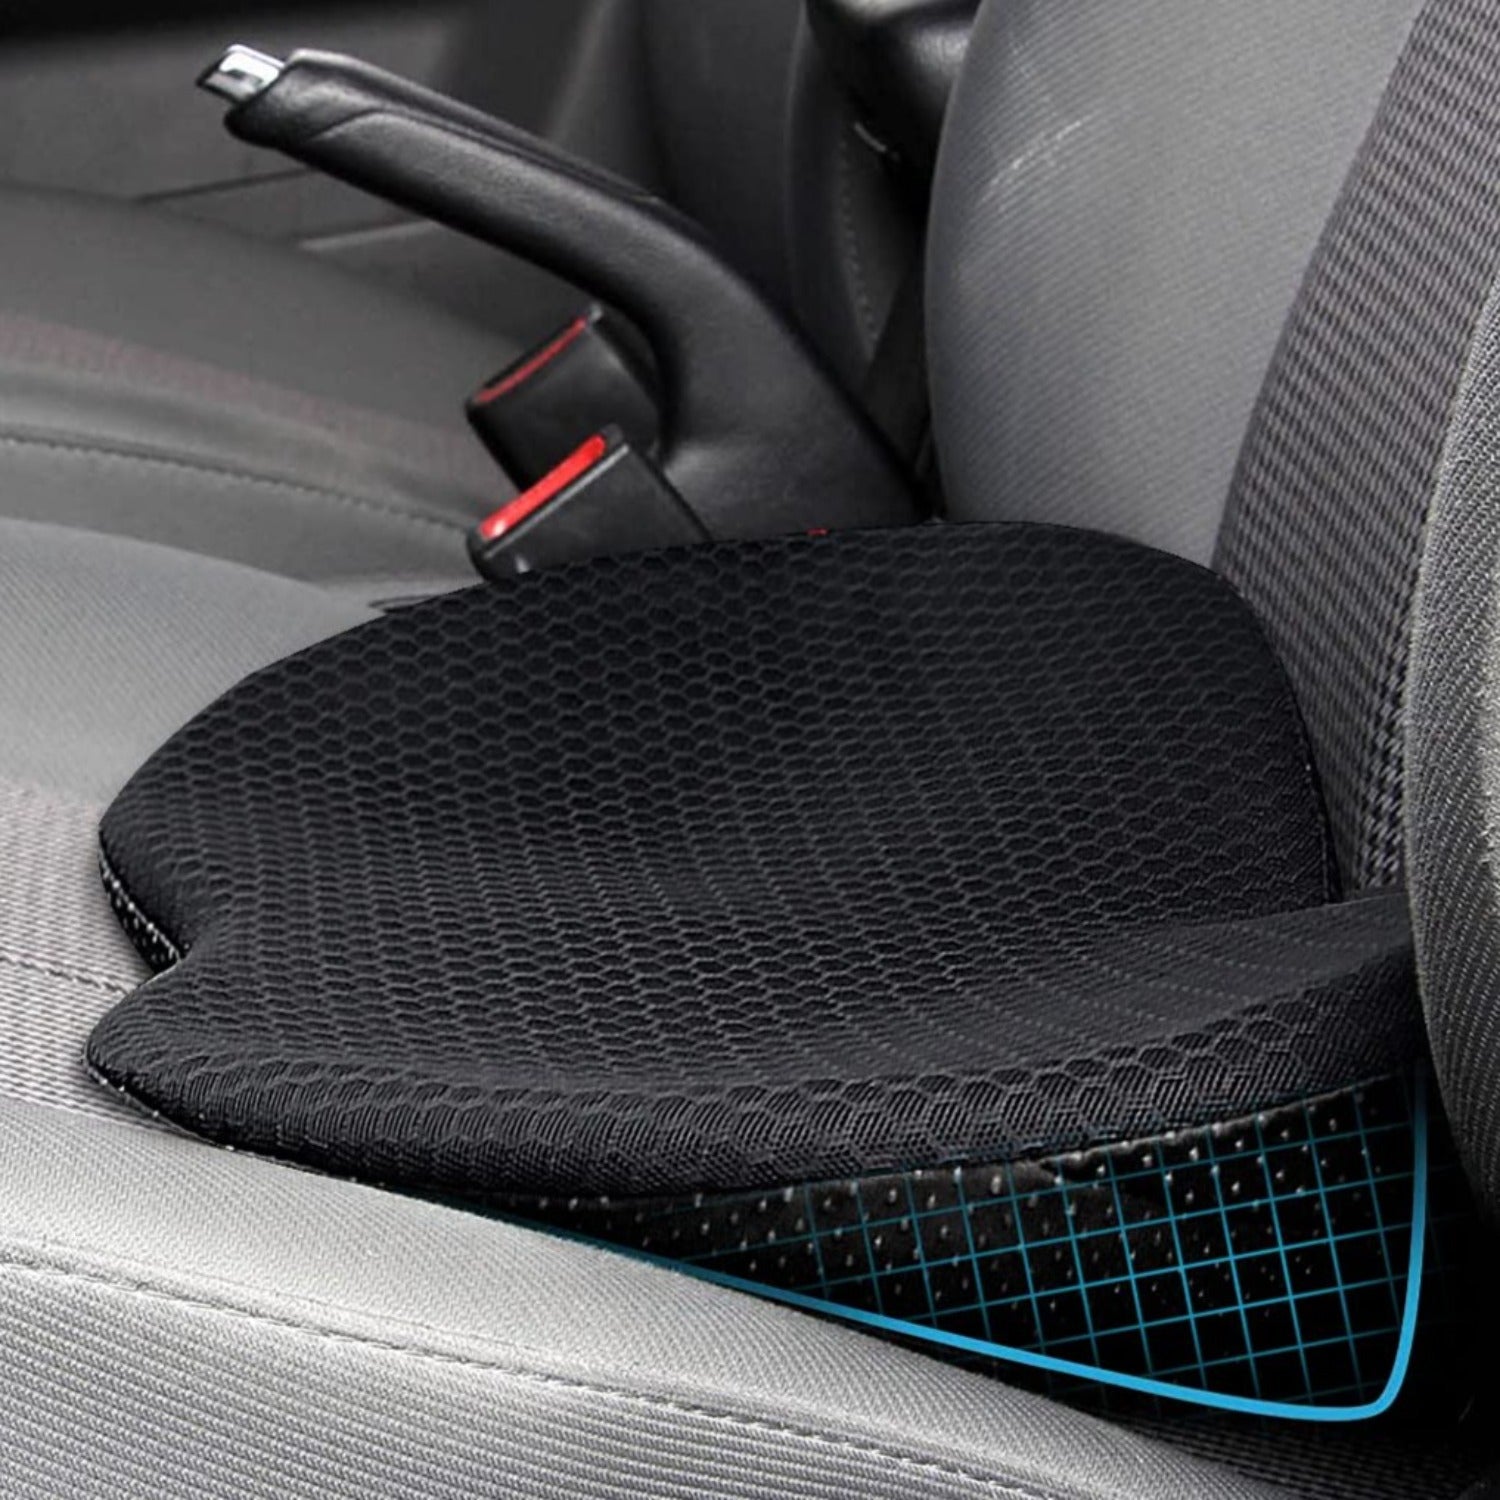 How Car Seat Cushions for Short People Can Make Driving Easier